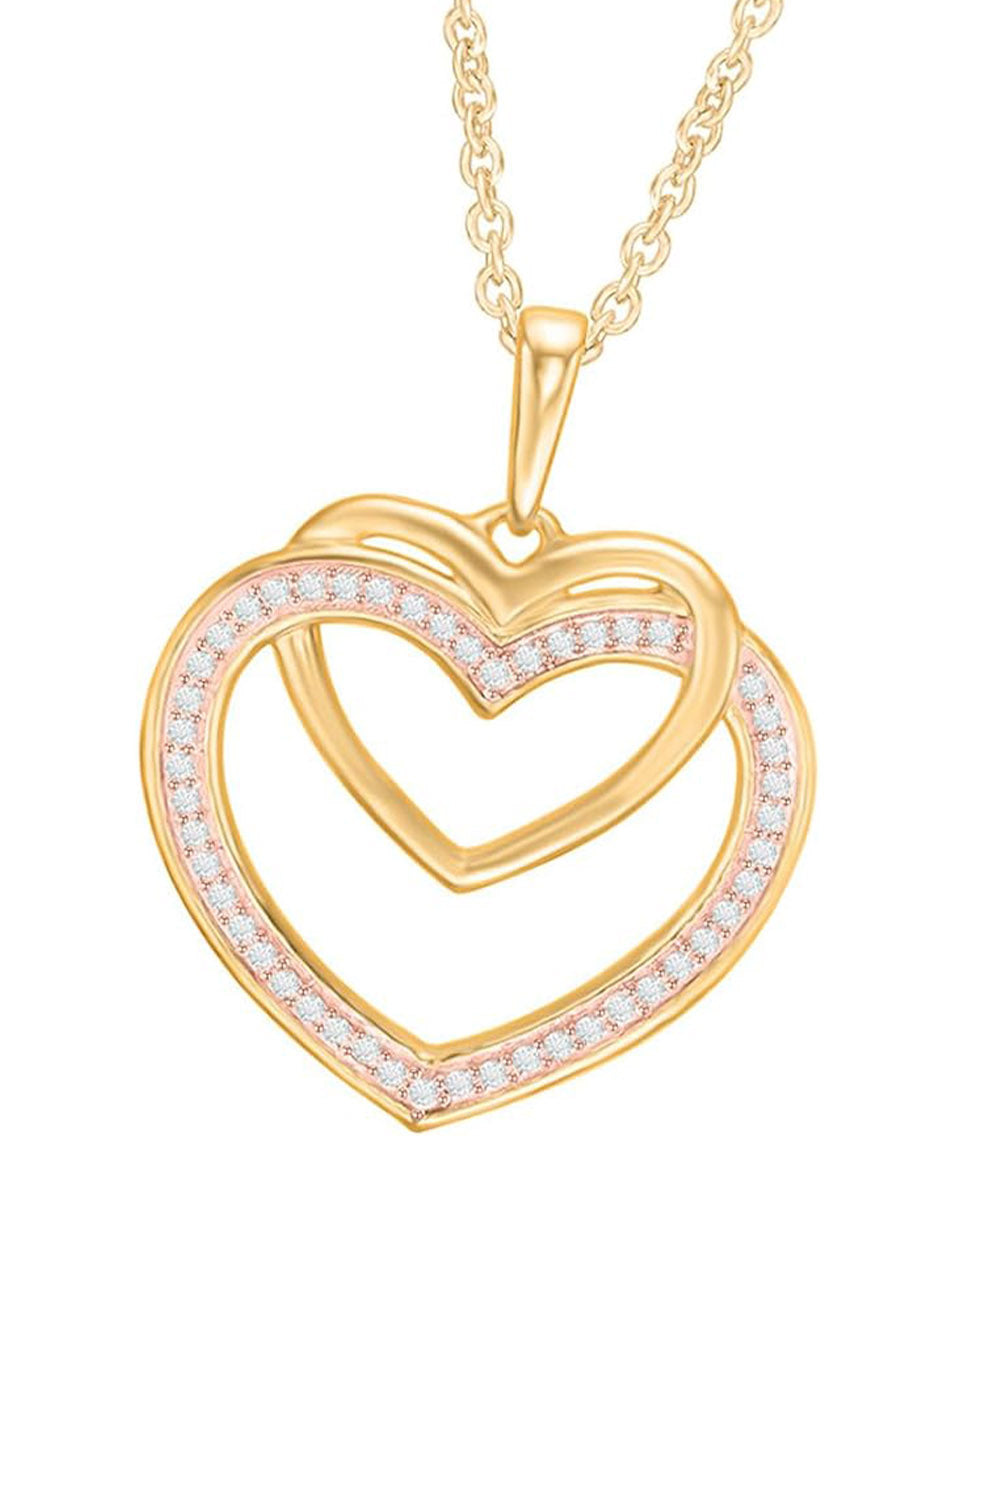 Moissanite Double Hearts Pendant Necklace in 18K Gold Plated Sterling Silver.